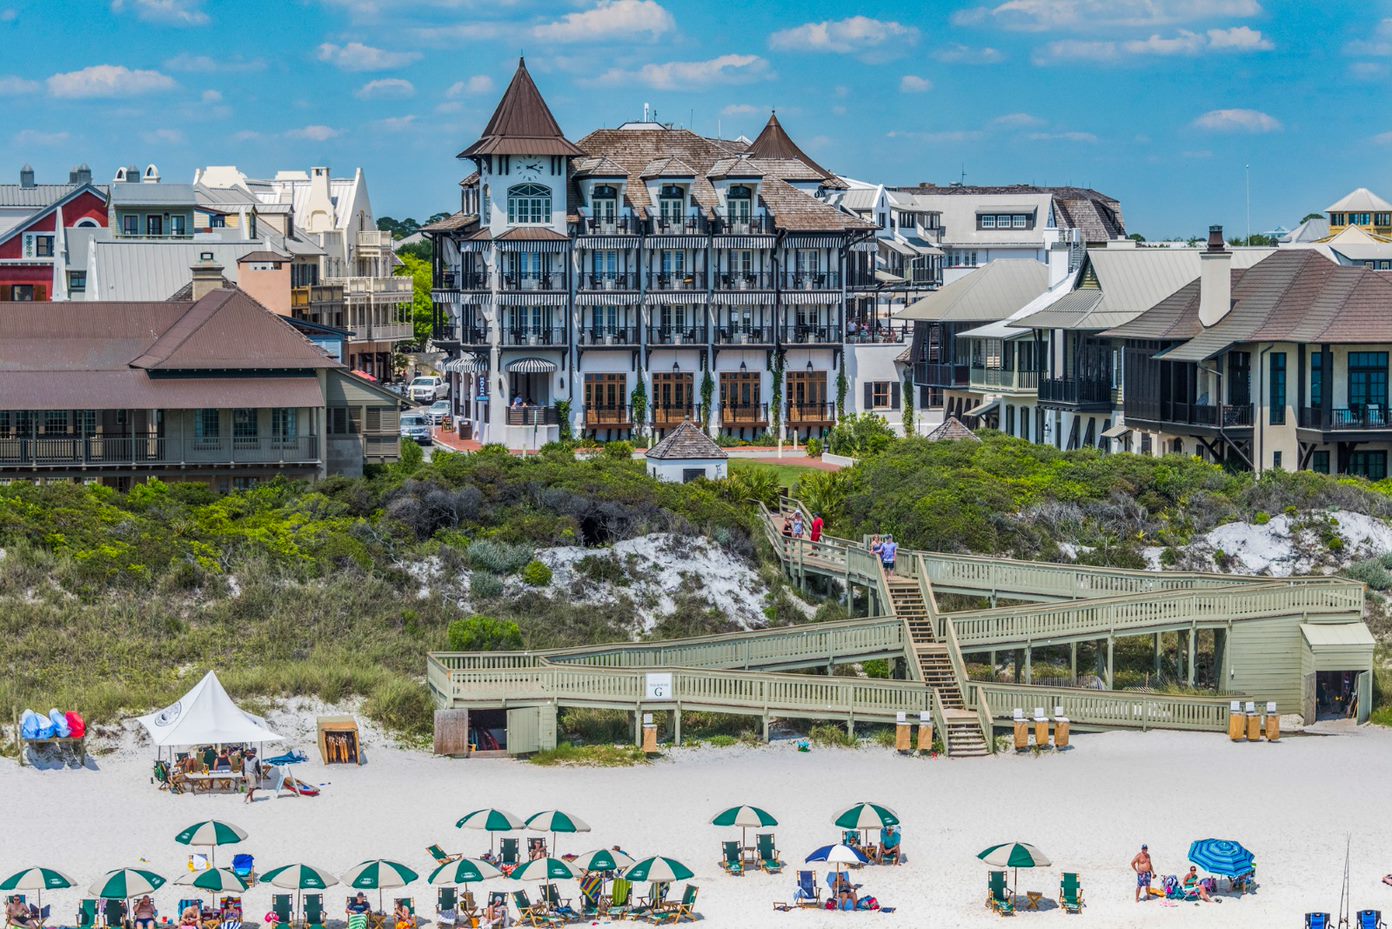 Rosemary Beach is close by